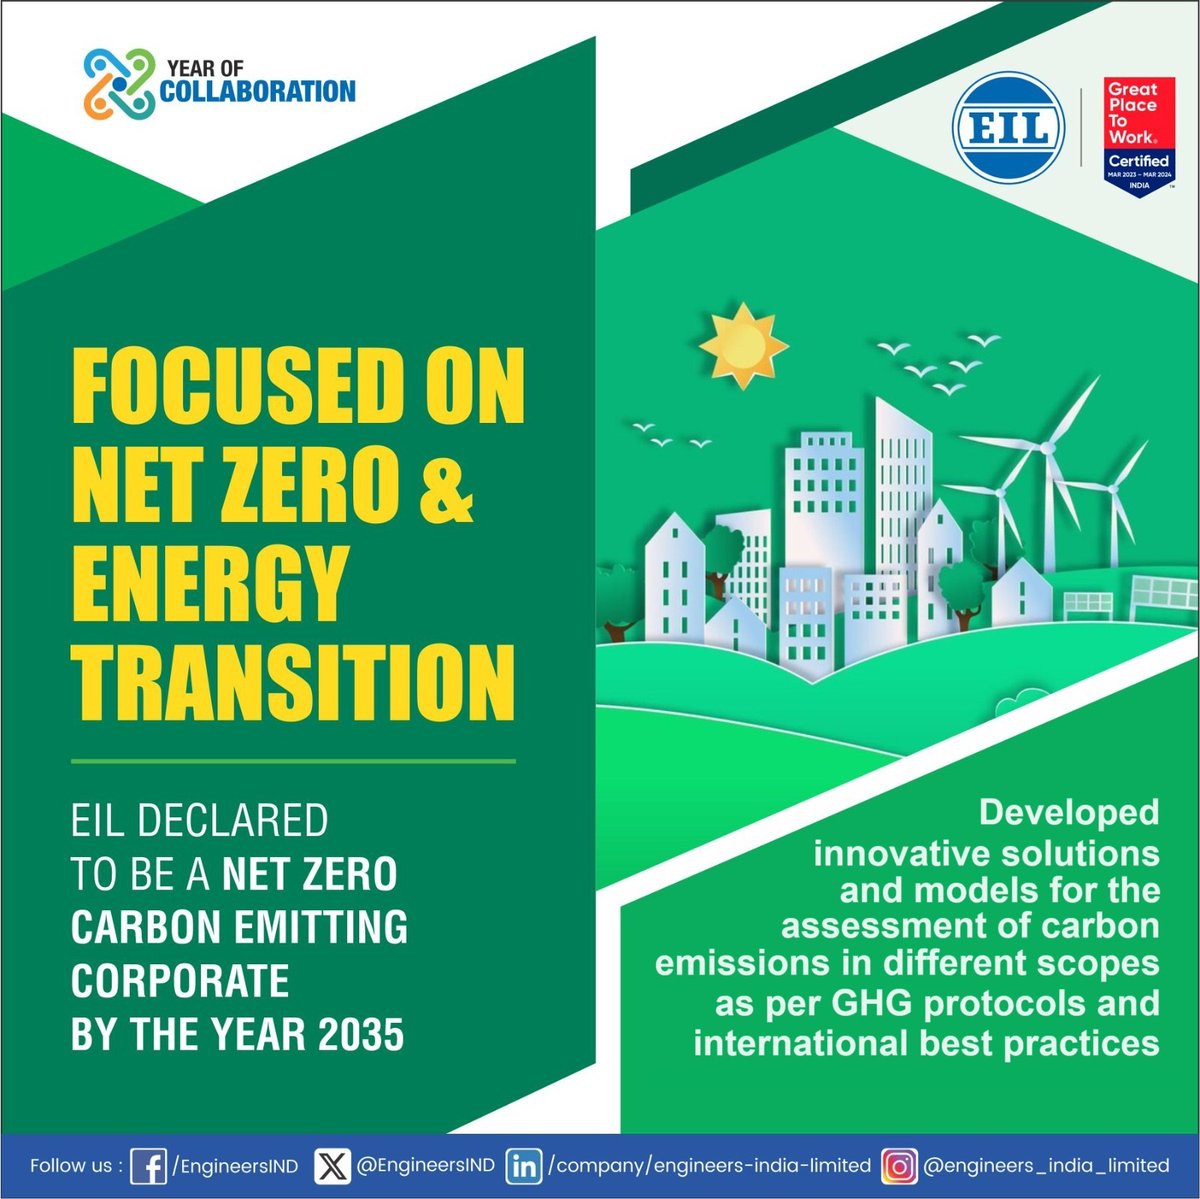 As a responsible corporate citizen, EIL declared to become a net zero carbon emitter by the year 2035. Owing to its vast experience of executing legacy projects in the energy sector, EIL is well placed to address the emerging needs of assessing GHG emissions for industries and